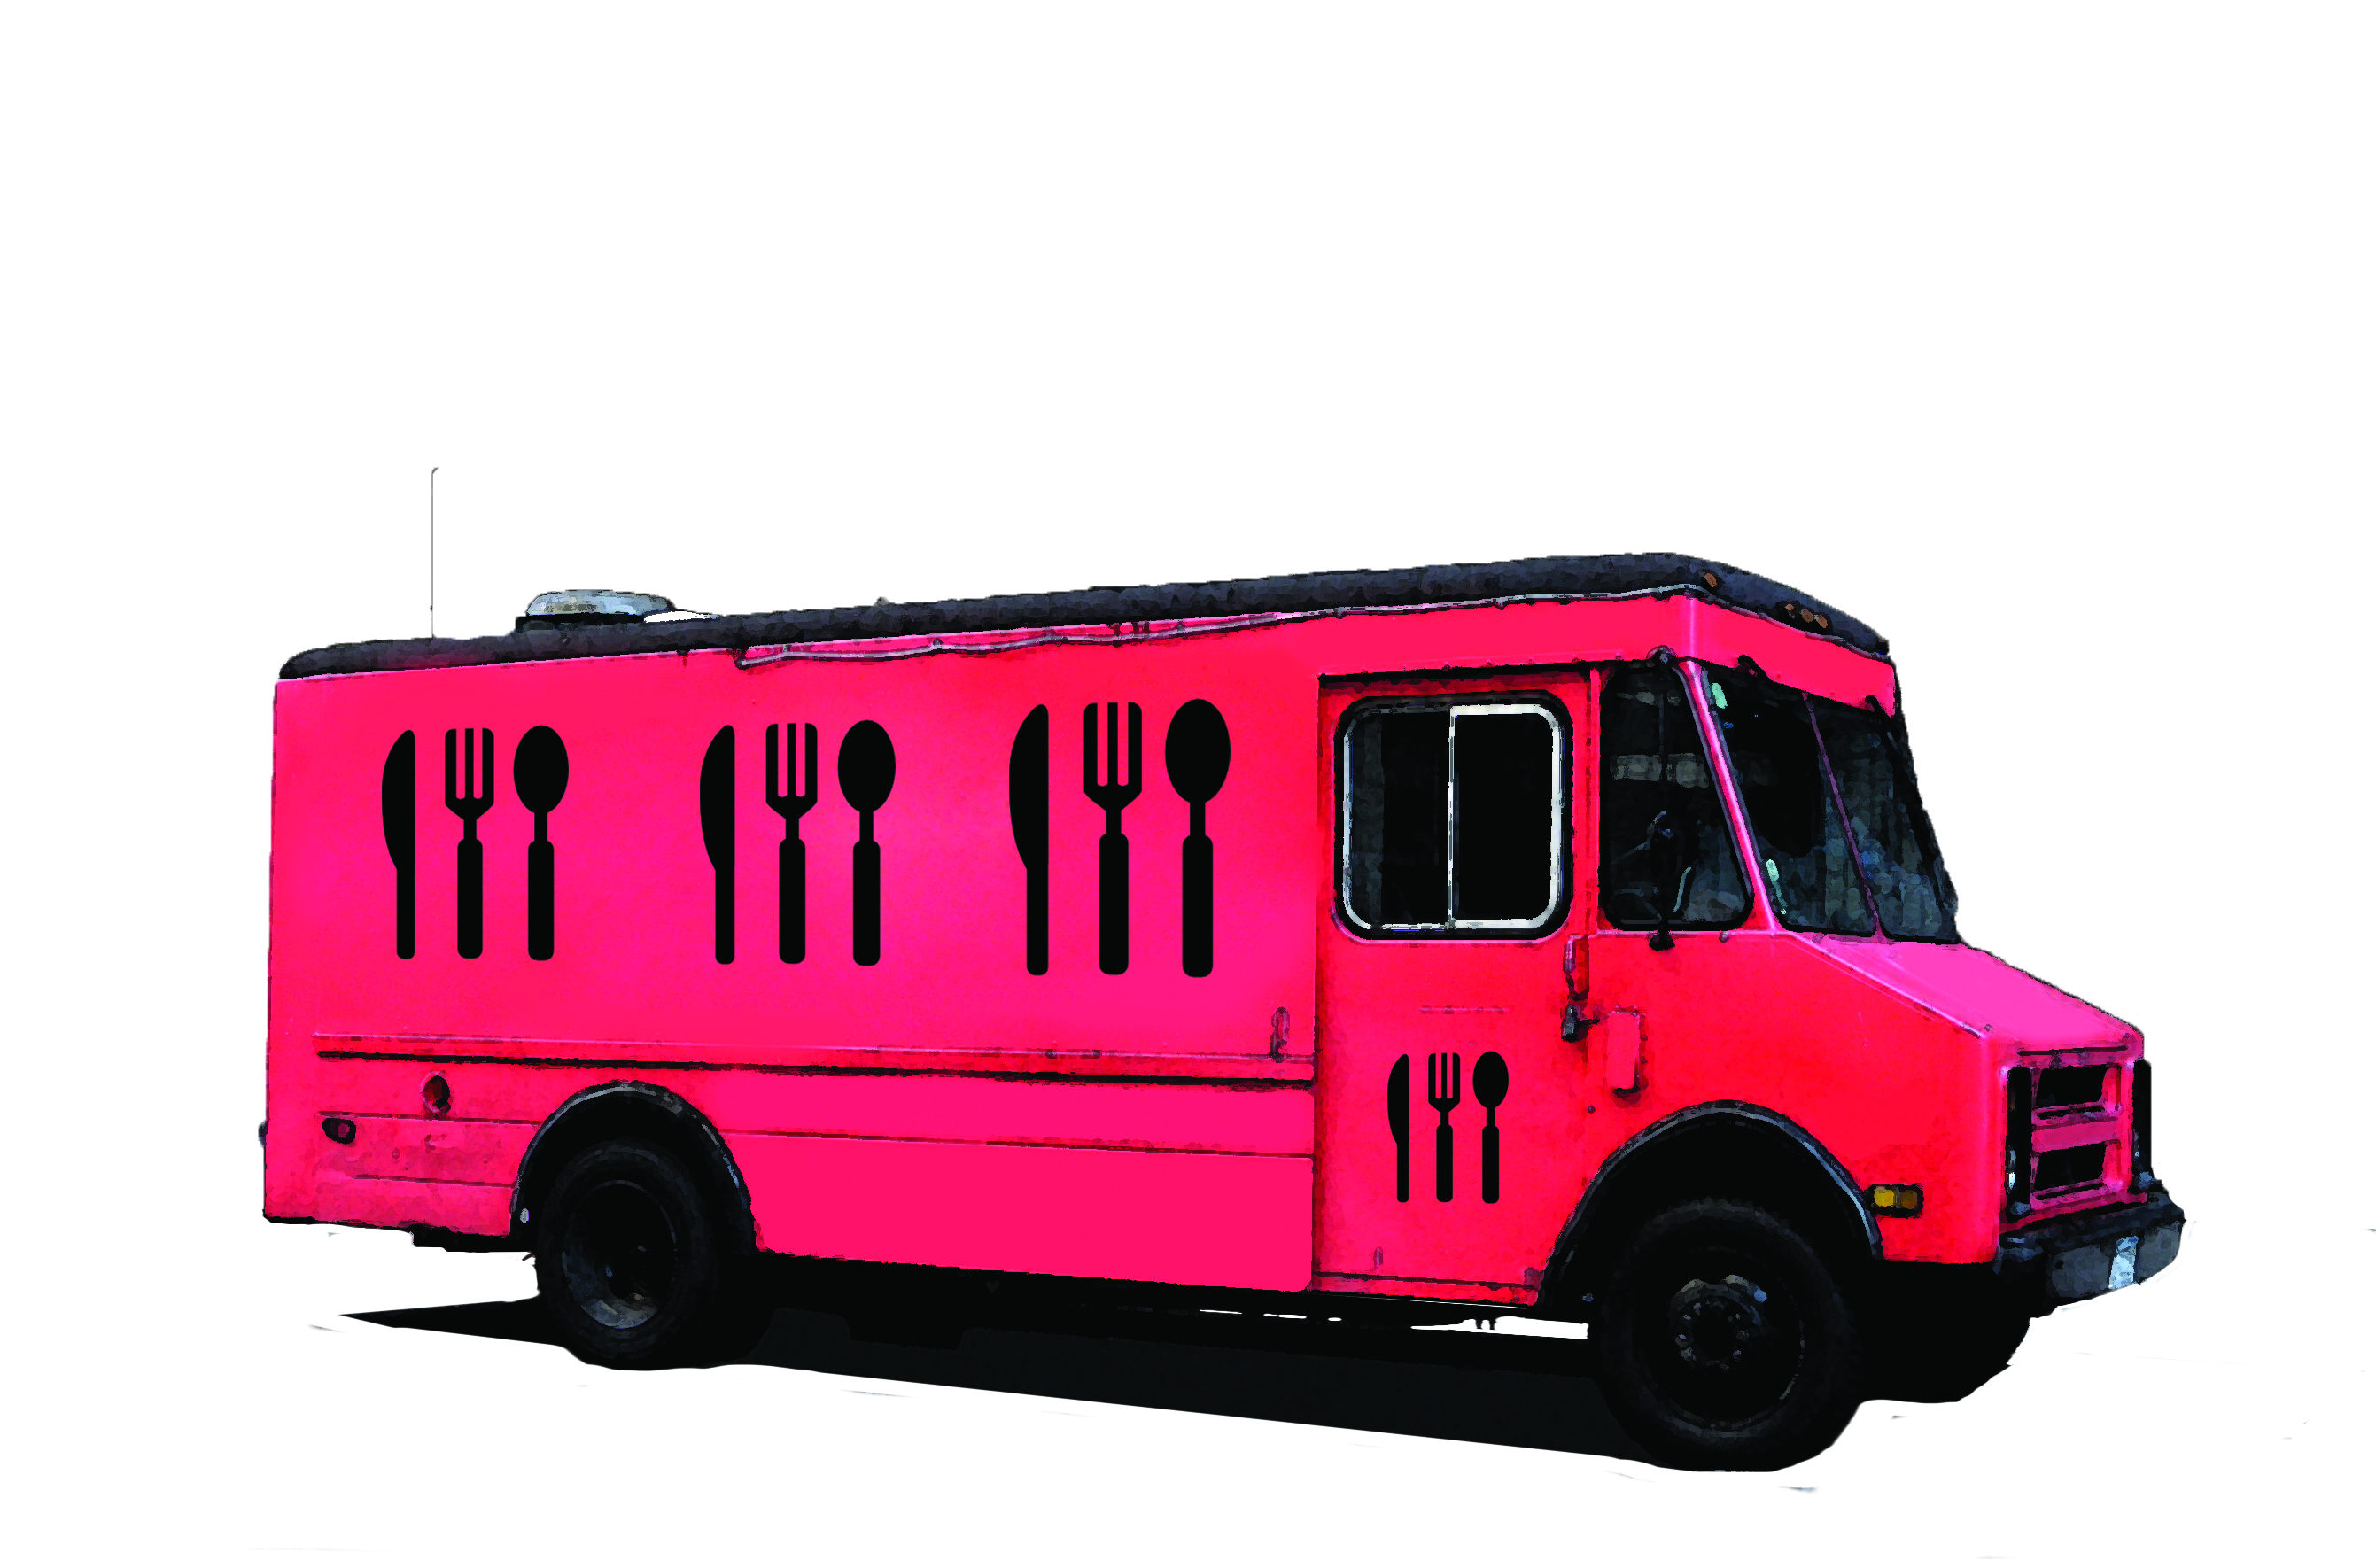 Meals on wheels: mobile food truck comes to campus